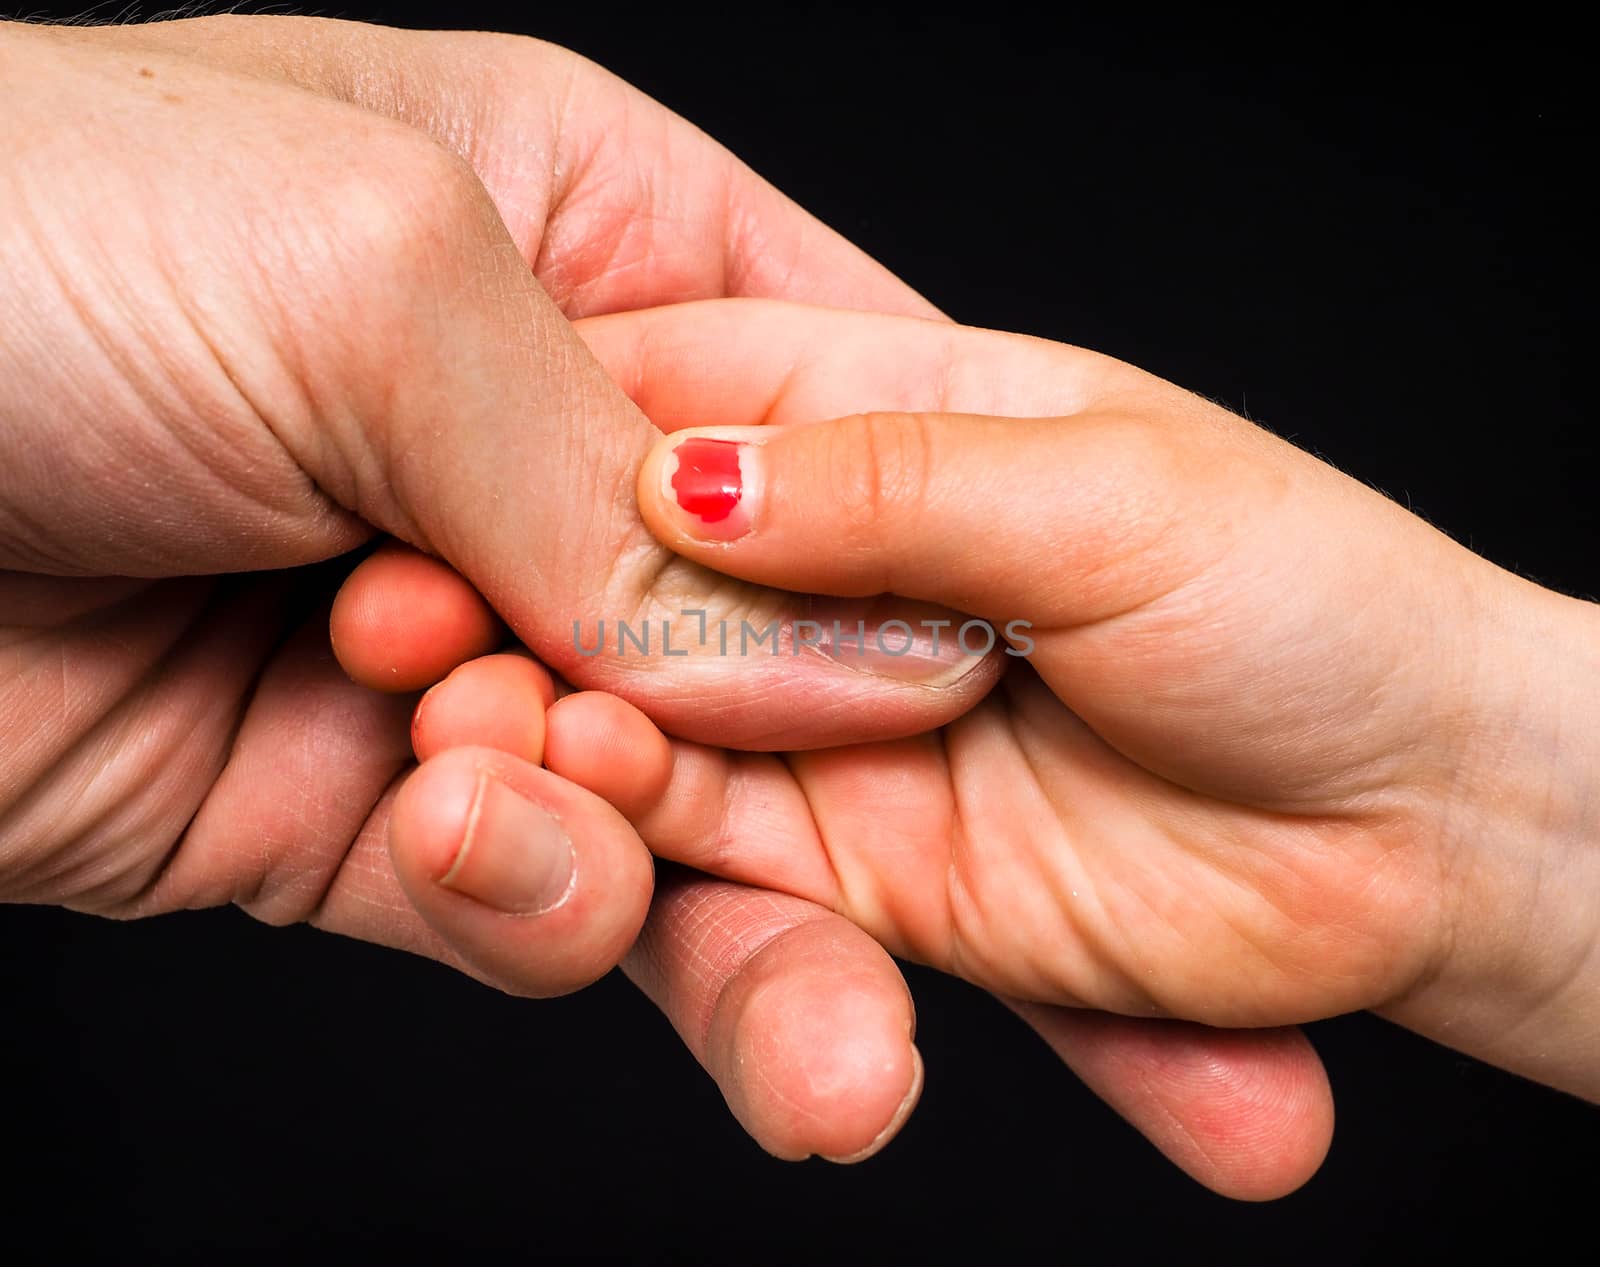 Daughter connecting with fathers hand by Arvebettum